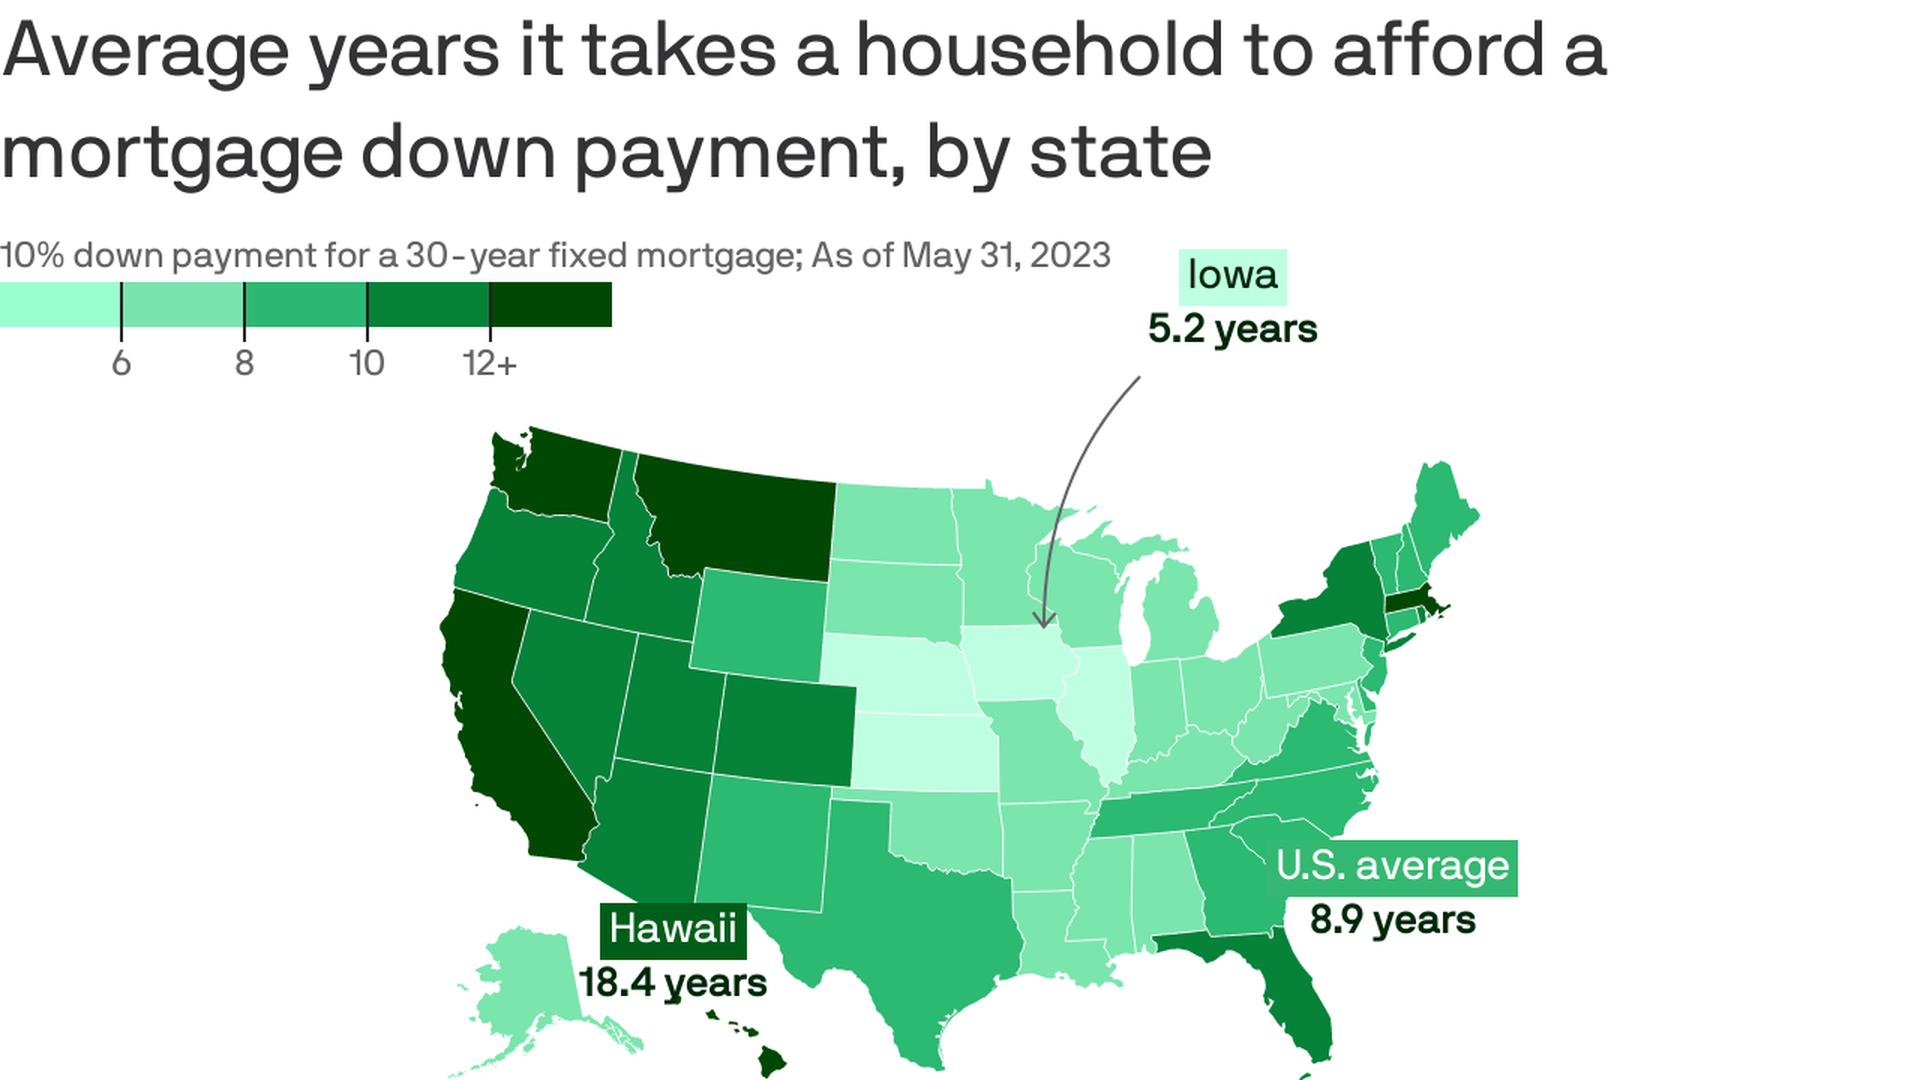 Green choropleth map showing the average years it takes a household to afford a 10% down payment on a 40-year fixed mortgage, by state, as of May 31, 2023. The U.S. average is 8.9 years, with states like Iowa being as low as 5.2 years and Hawaii as high as 18.4.